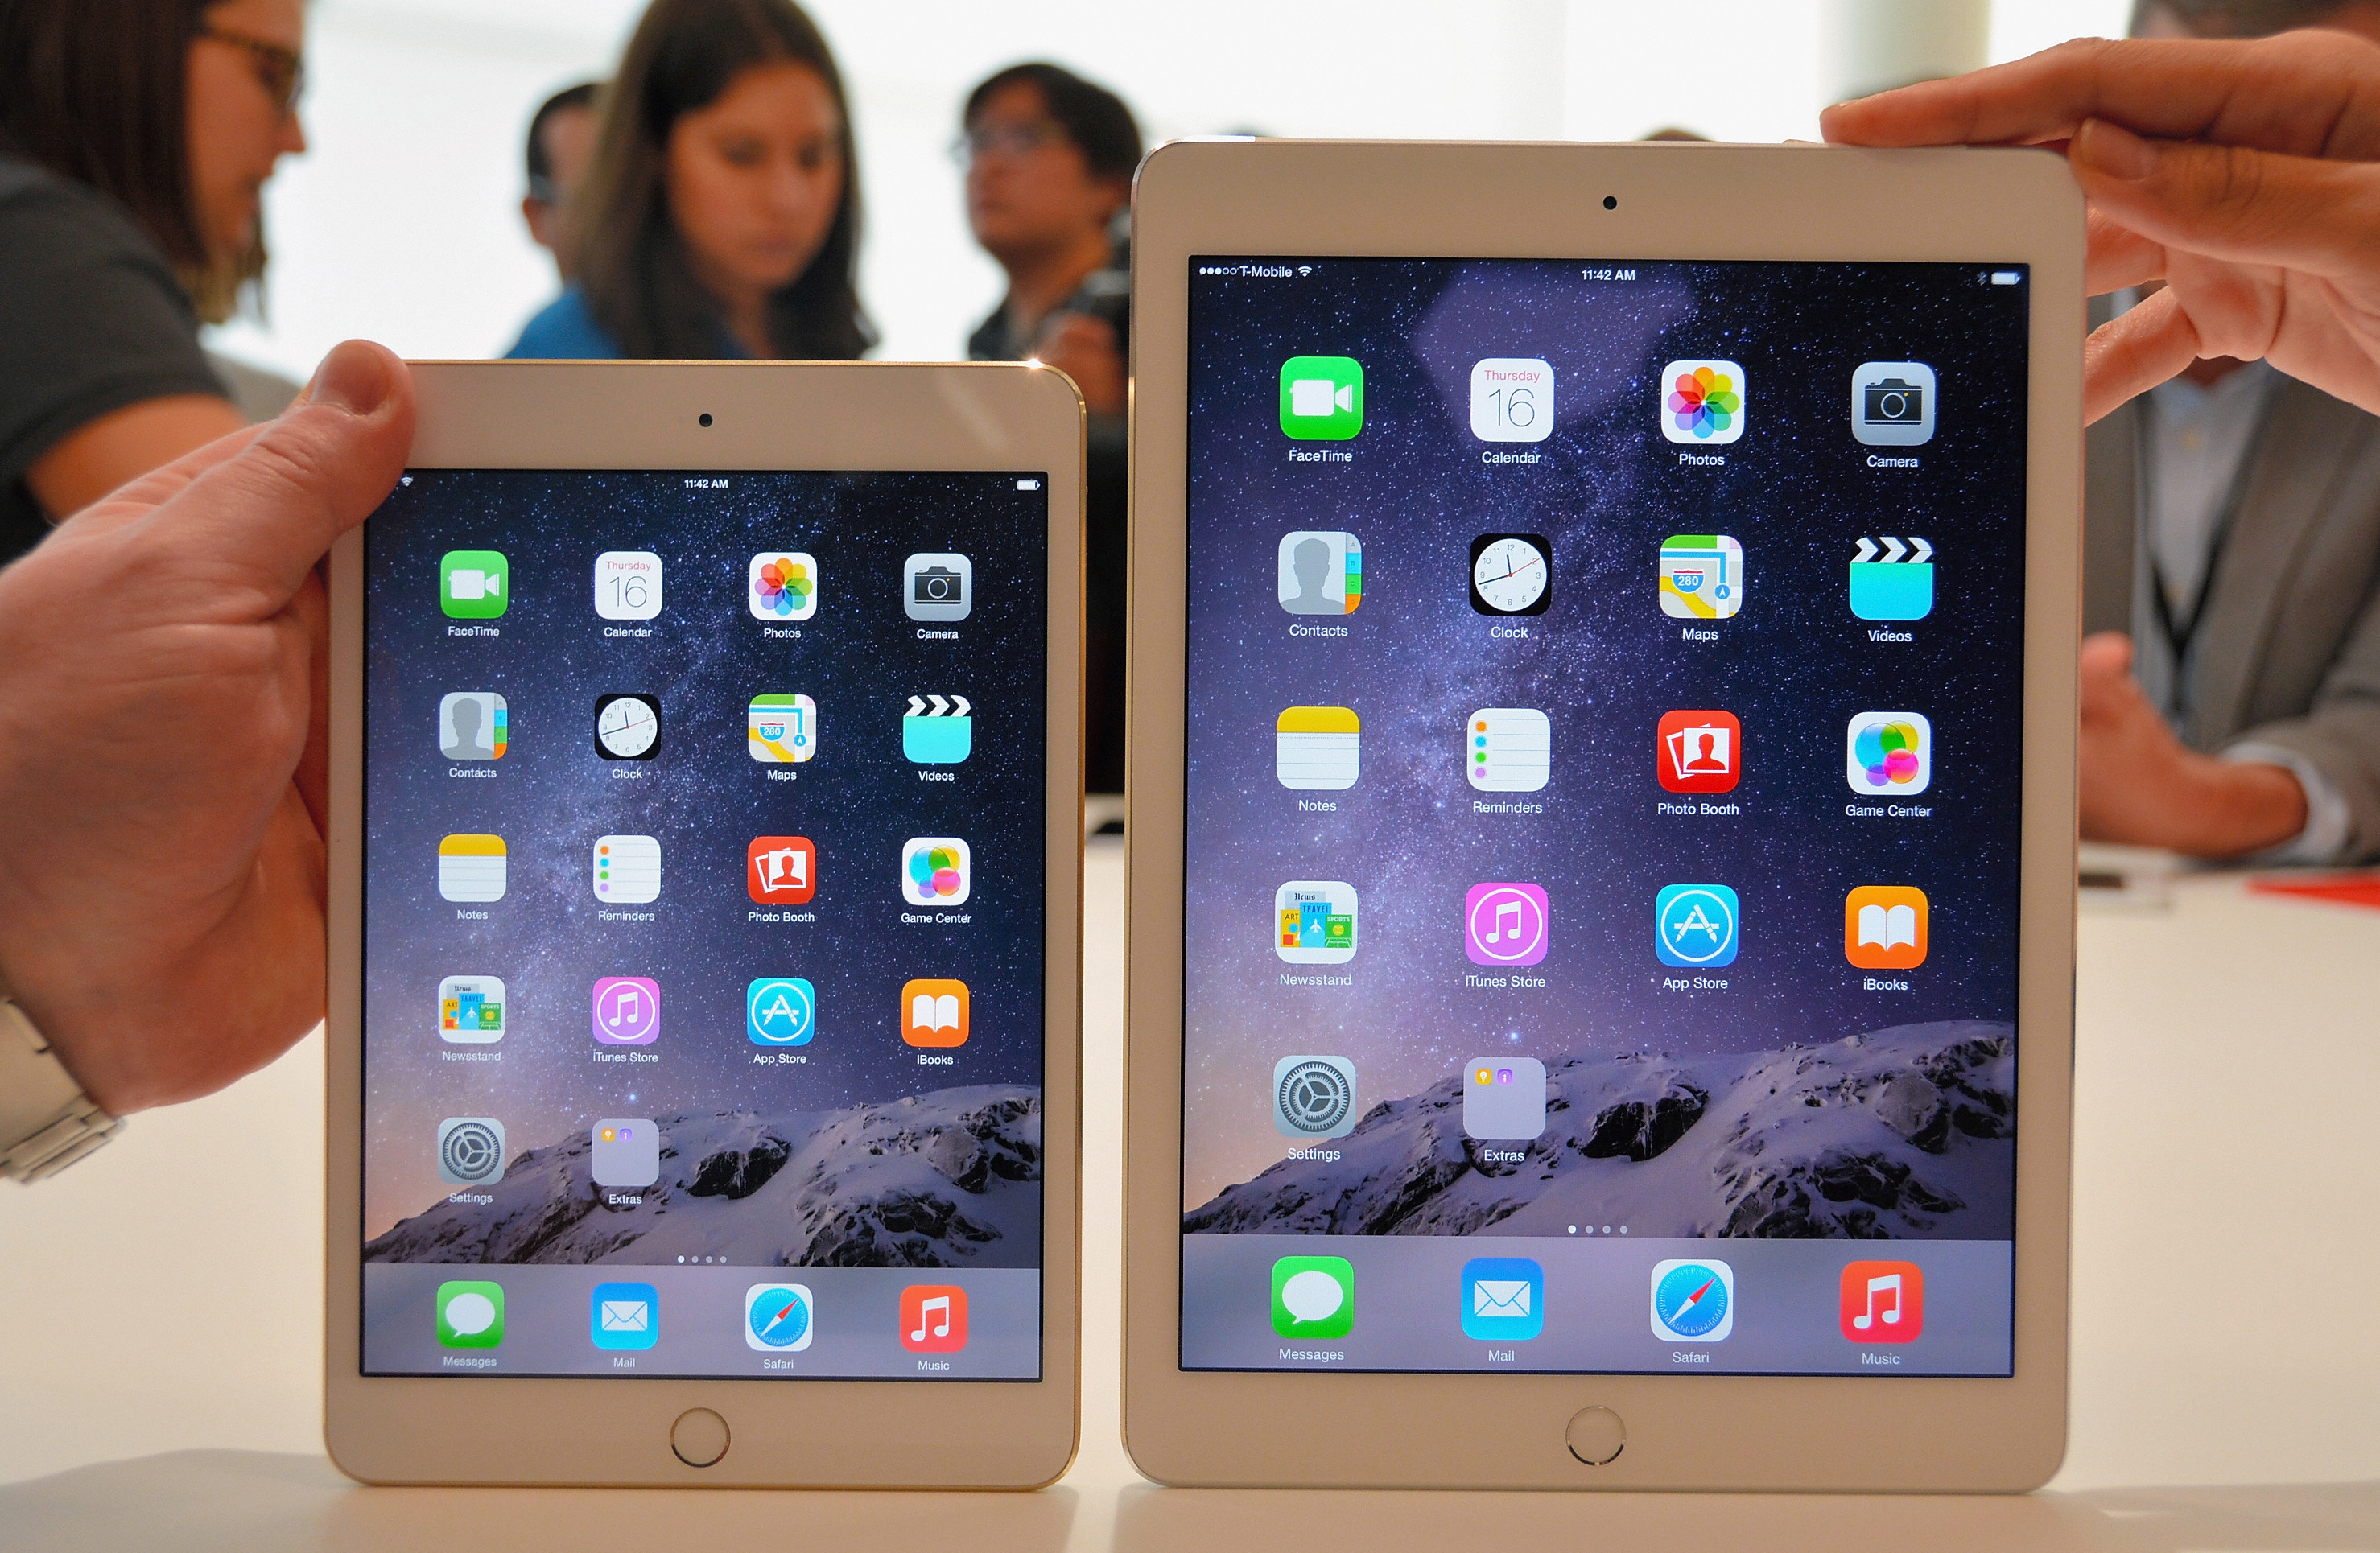 The new iPad Air 2 (R) and iPad Mini 3 are displayed during an Apple special event on October 16, 2014 in Cupertino, California. Apple unveiled the new iPad Air 2 and iPad Mini 3 tablets and the iMac with 5K retina display. (The Asahi Shimbun—2014 The Asahi Shimbun)